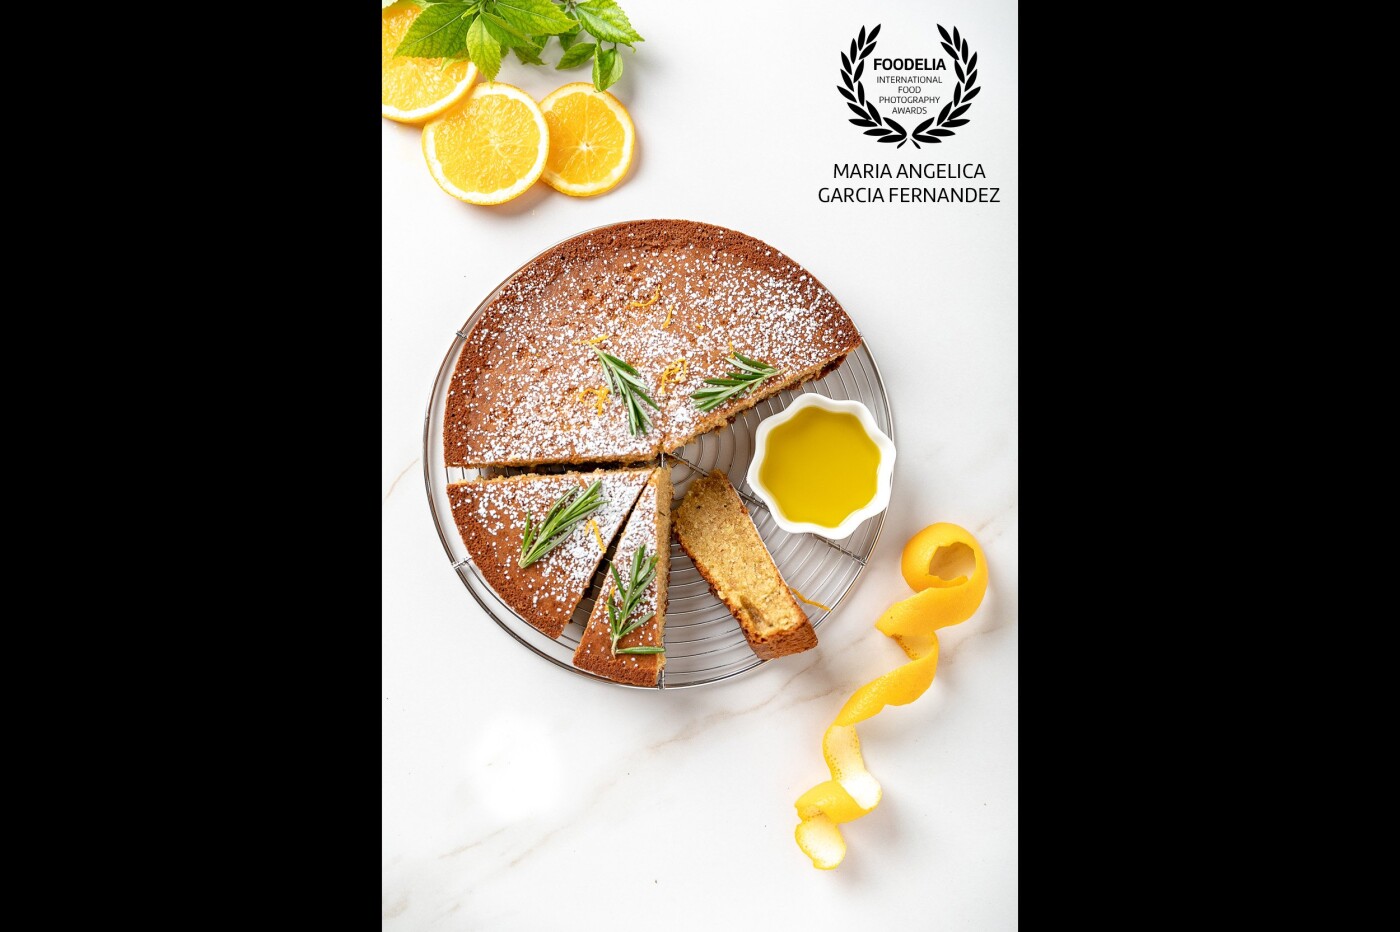 Olive oil cake with Rosemary and oranges. It made part of my recent blog post for November- December on my food blog. Celestial beam photography and also a collaboration with an International Olive oil brand.